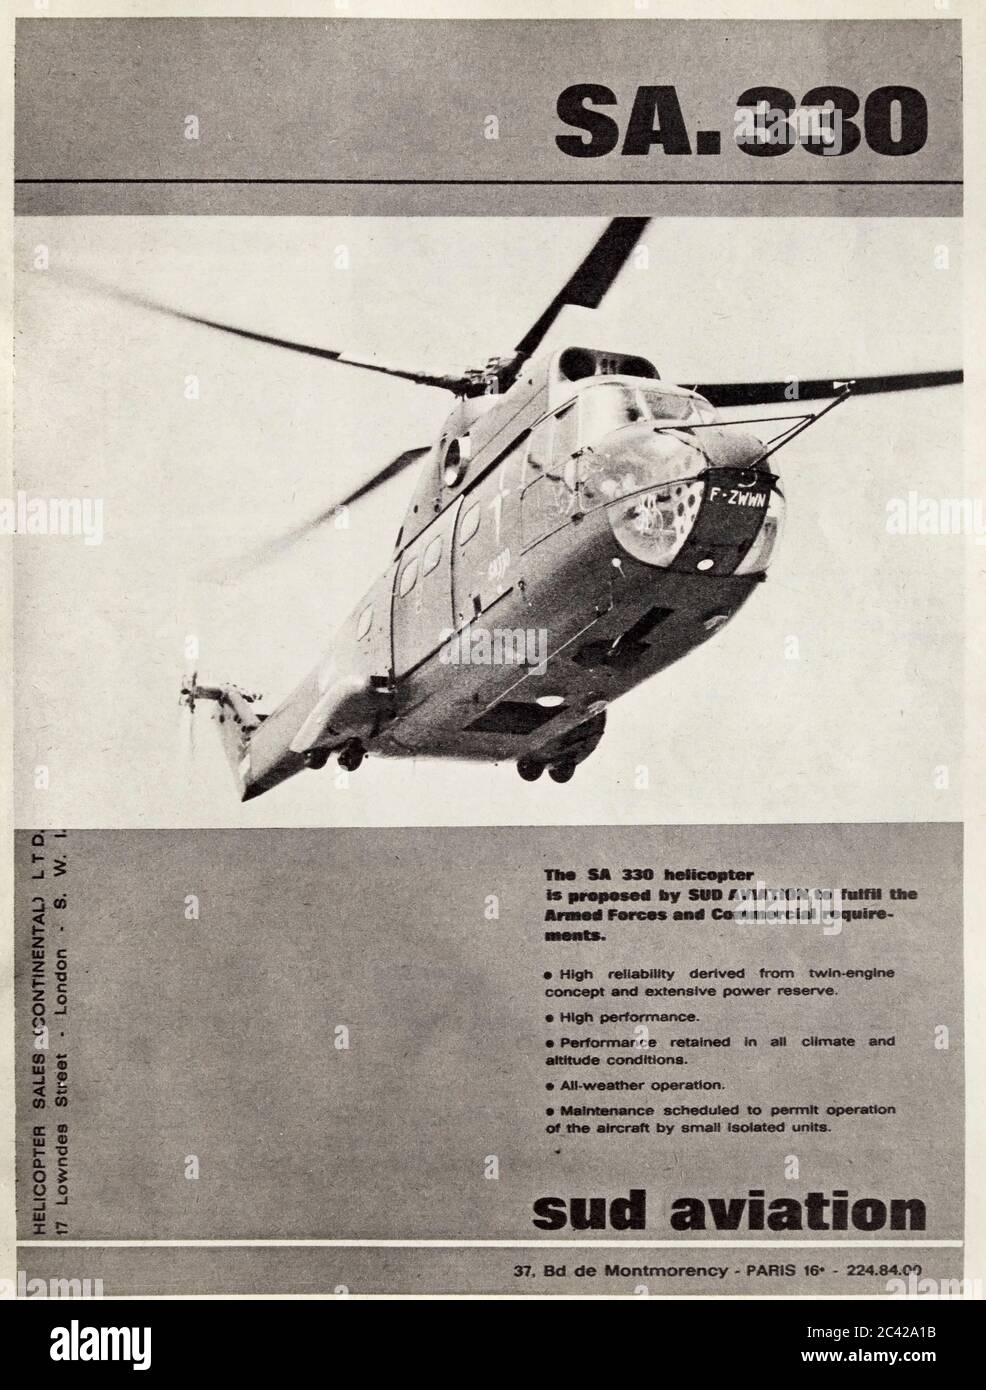 Vintage advertisement for the Sud Aviation SA.330 Puma helicopter Stock  Photo - Alamy